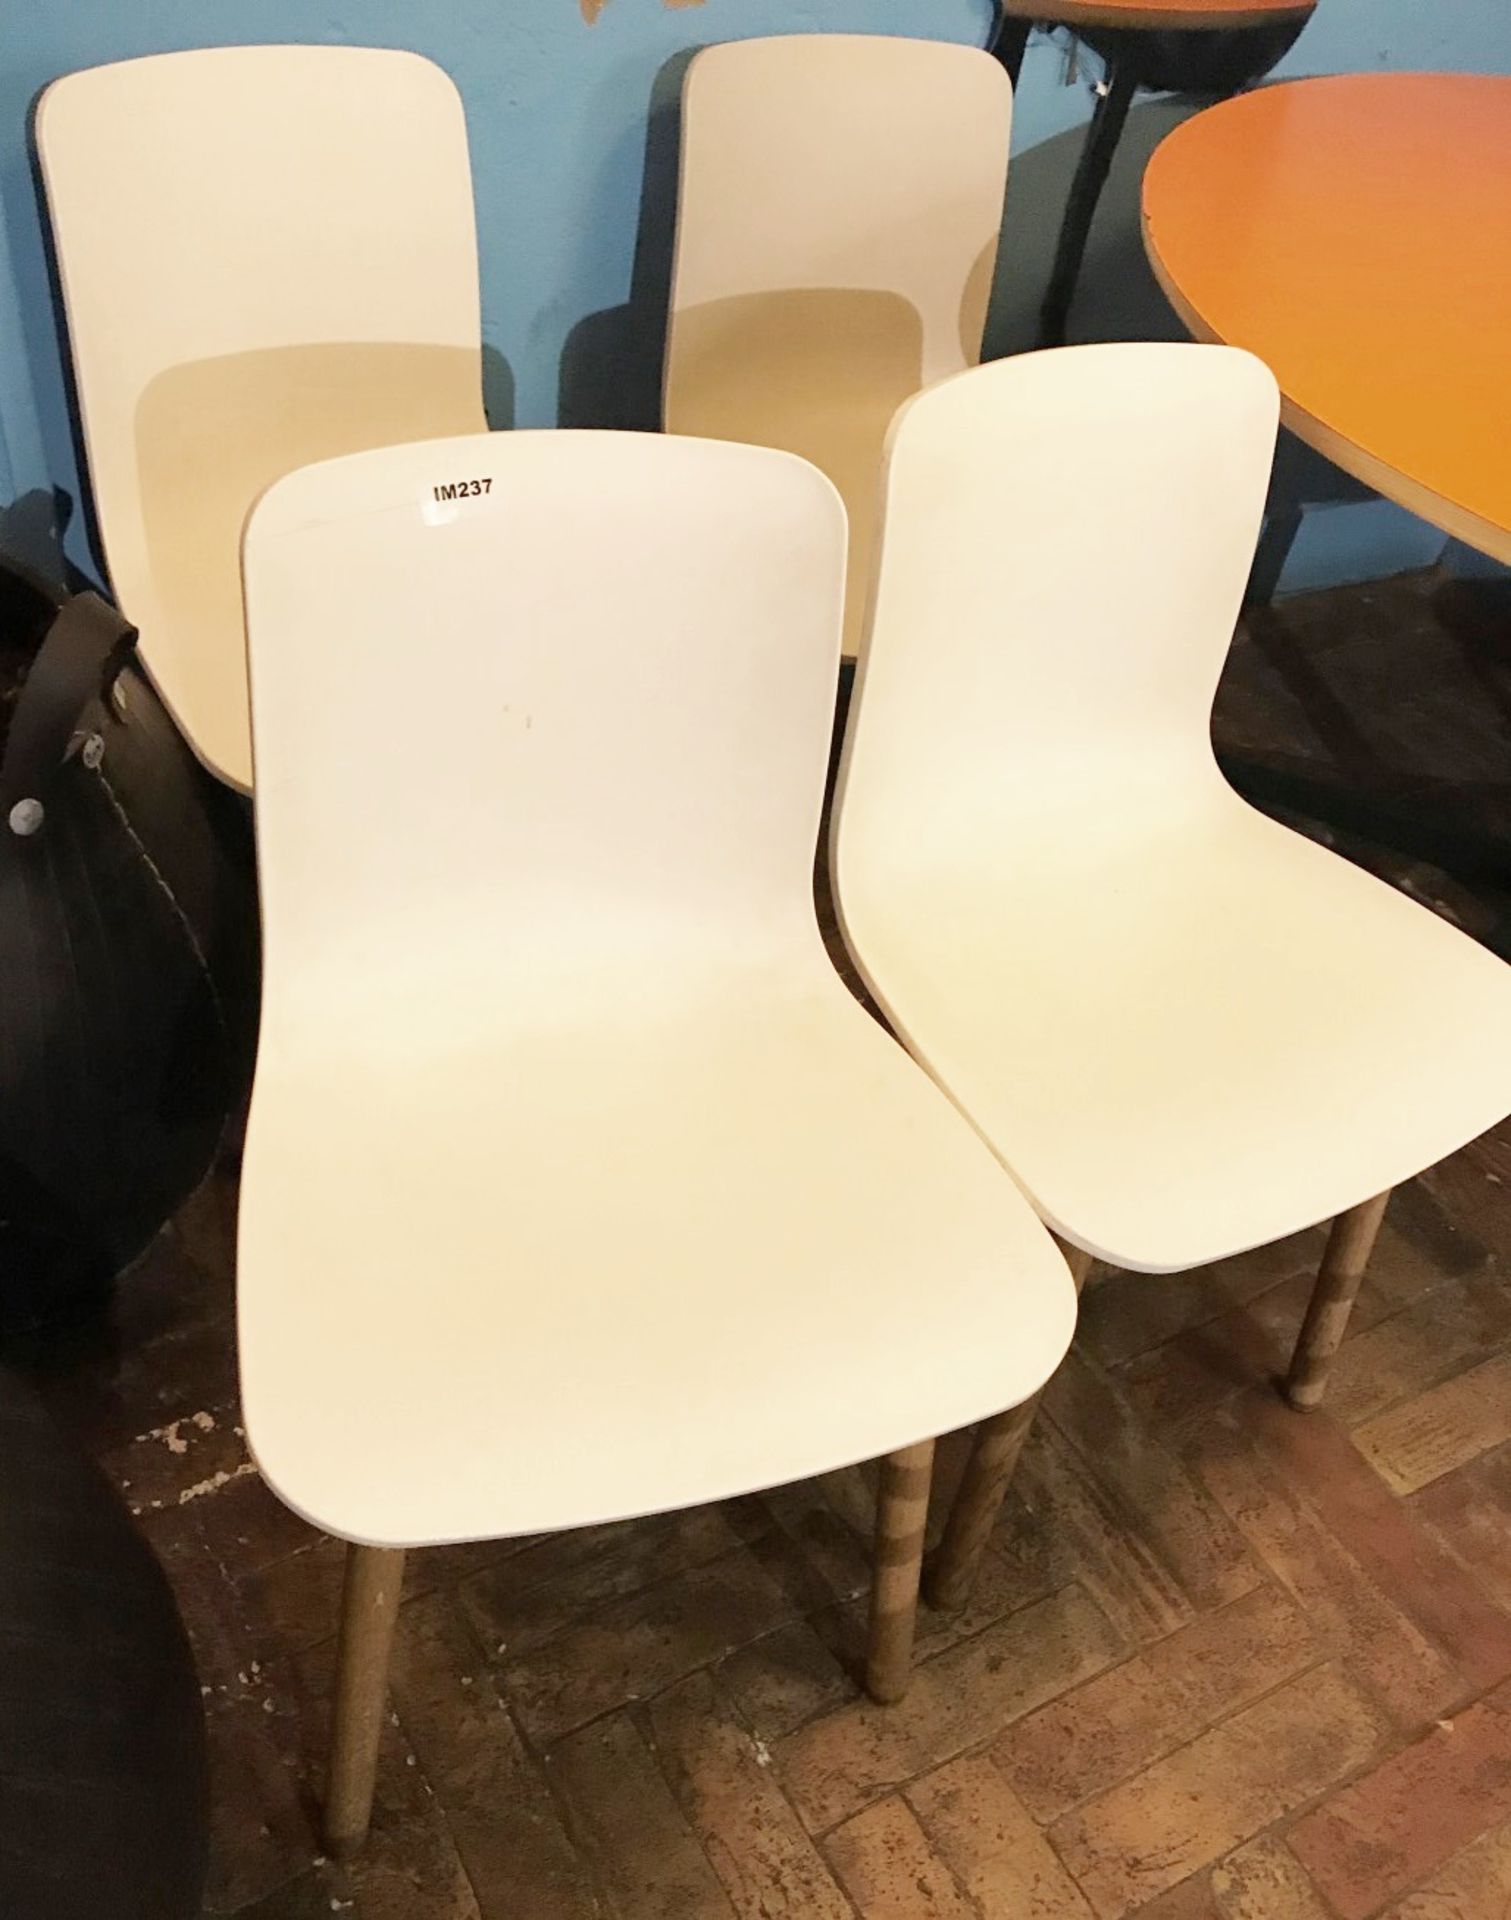 4 x Dining Chairs With Wooden Legs and White Seats - CL554 - Ref IM237 - Location: Altrincham WA14